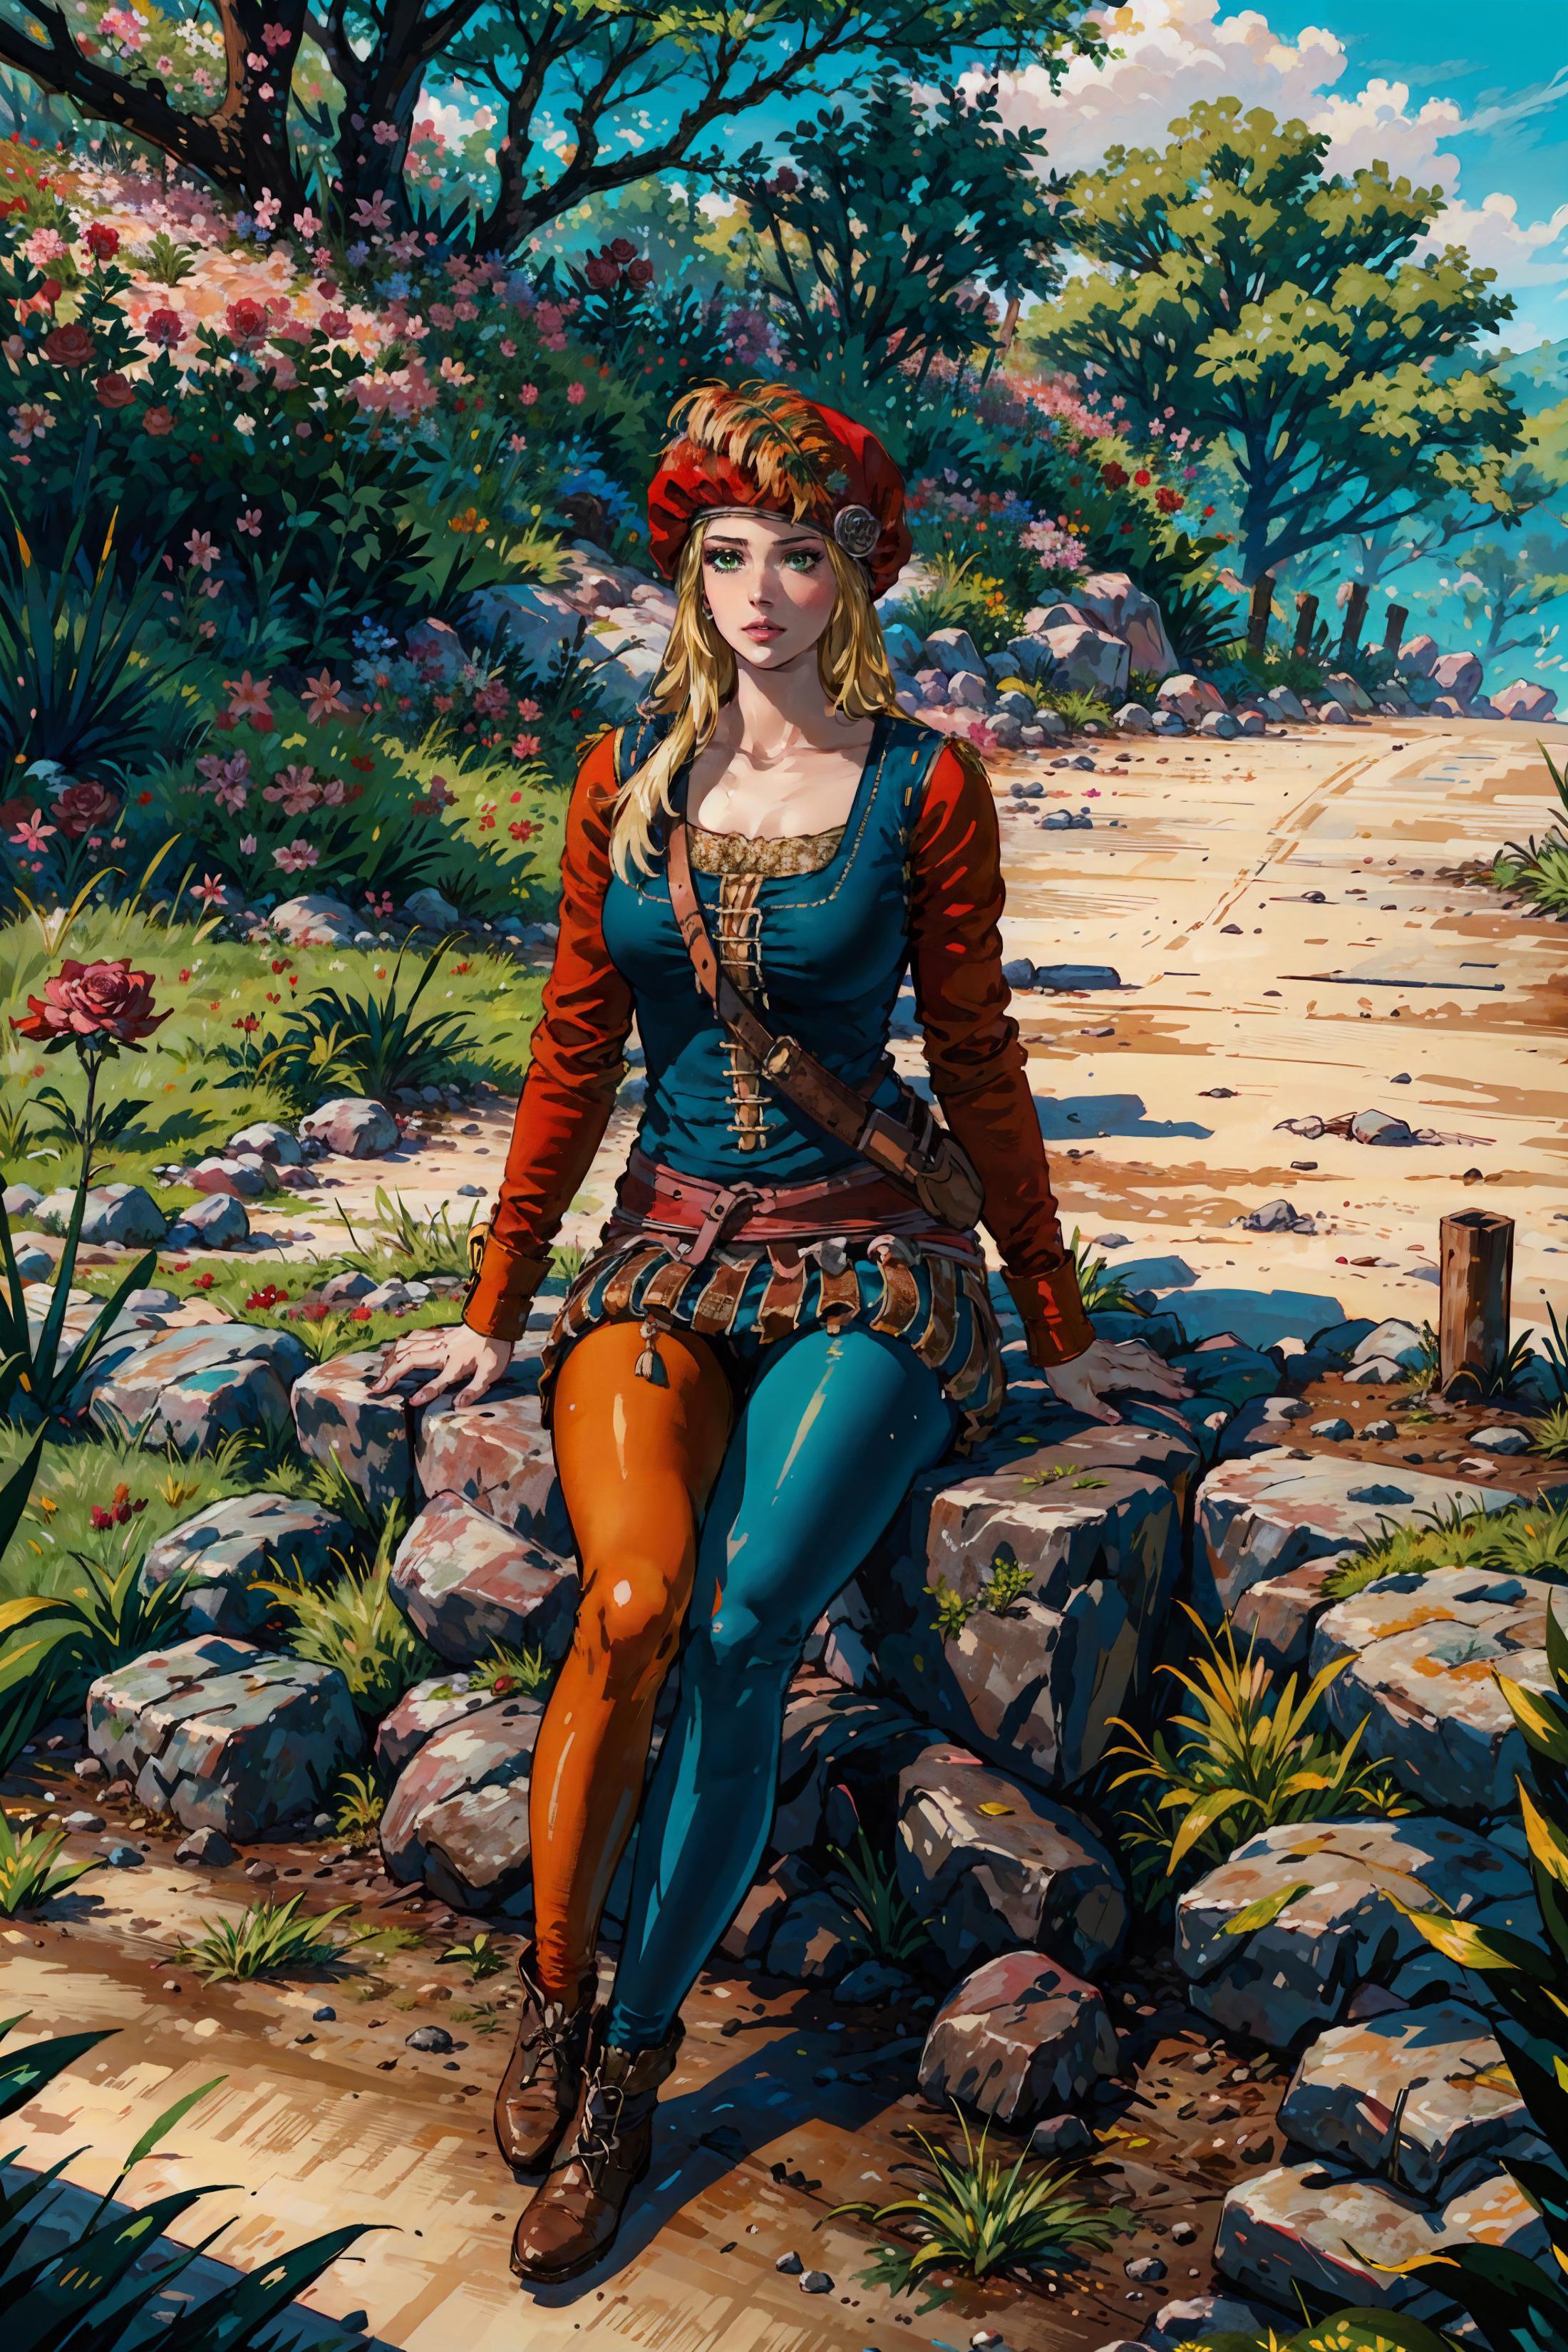 Priscilla | The Witcher 3 : Wild Hunt image by soul3142